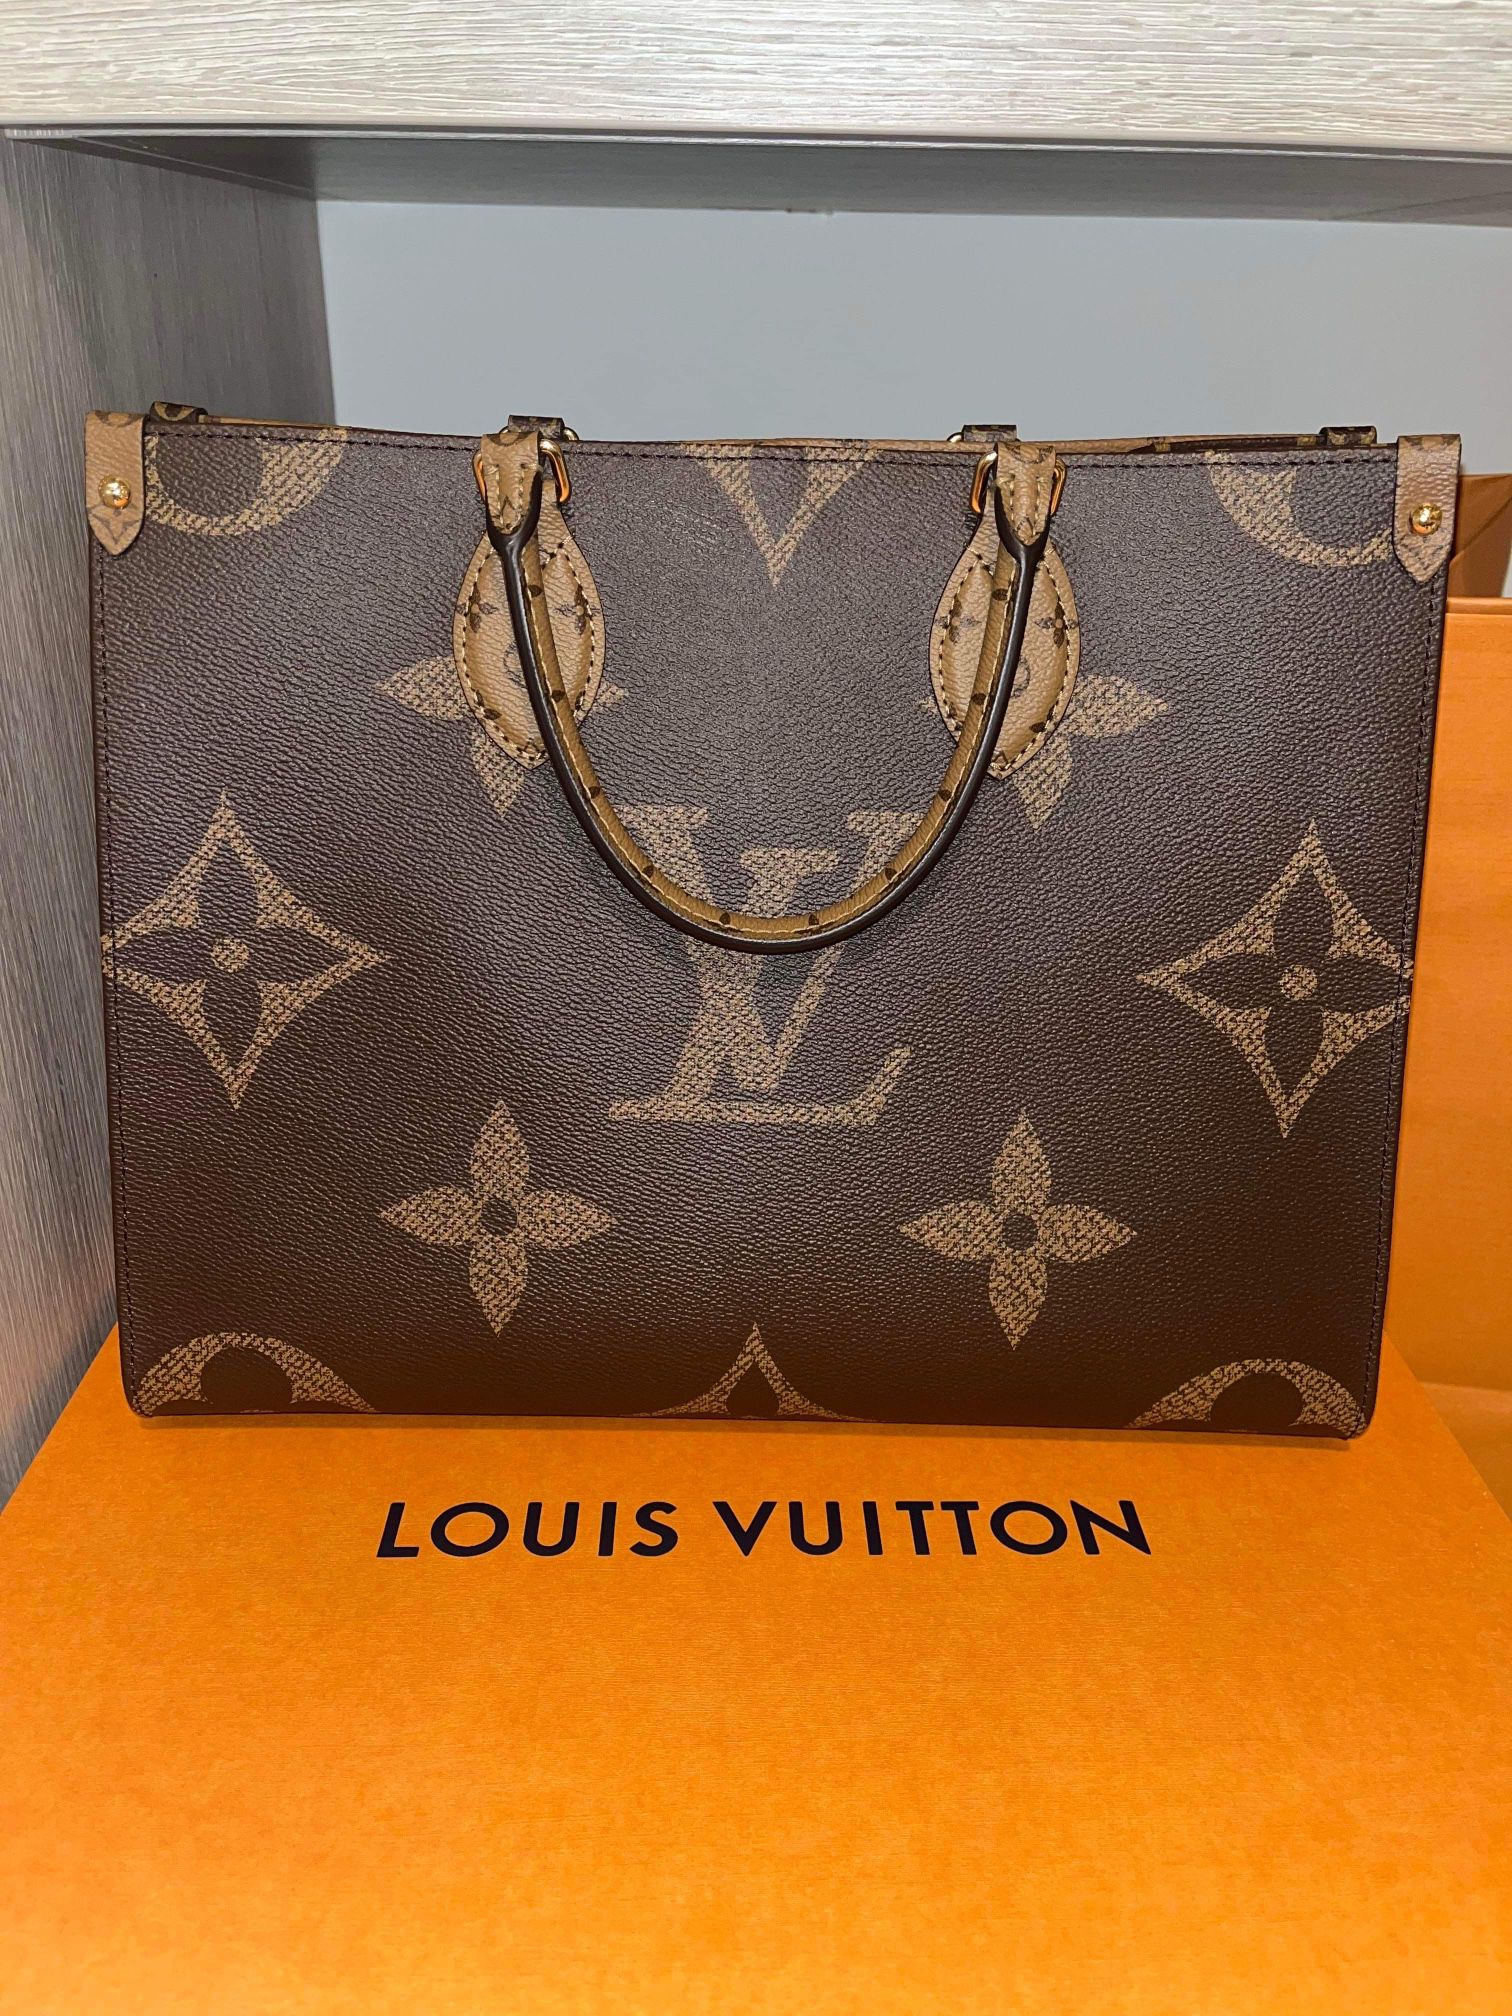 Louis Vuitton Bag for Sale in Commack, NY - OfferUp